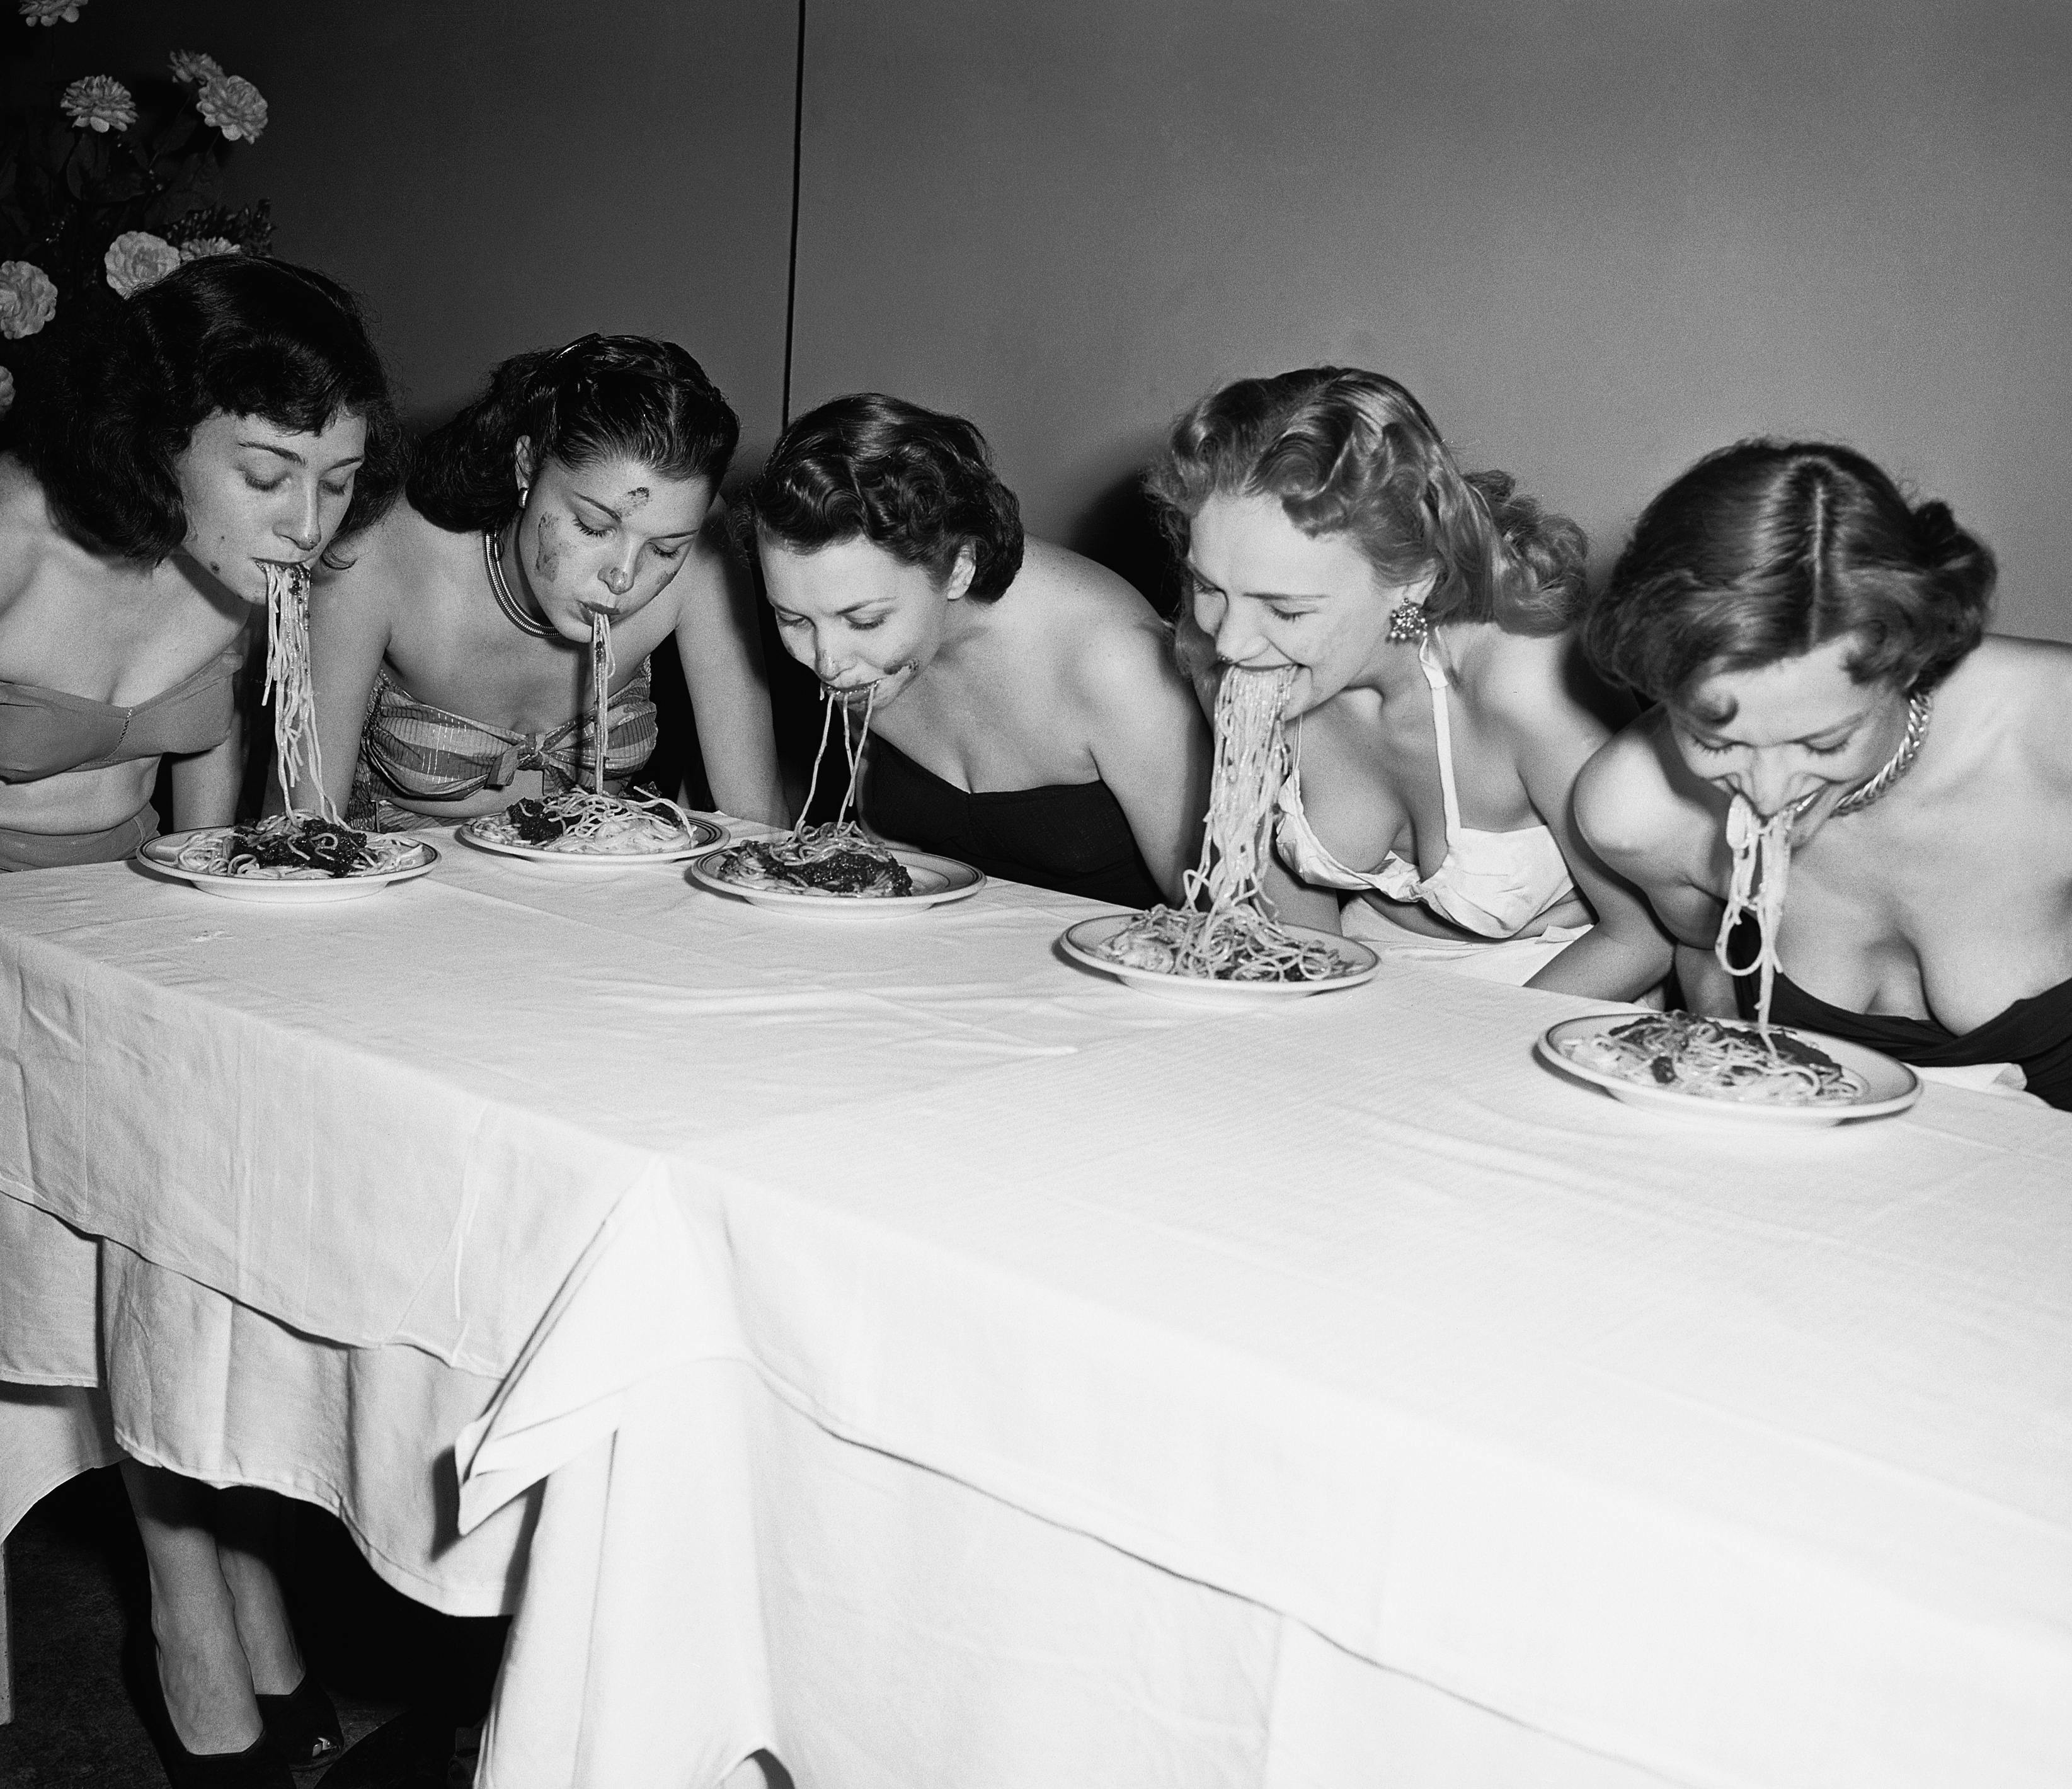 eating fun rivalry women head and shoulders portrait caucasian ethnicity dinner plate competitor flower arrangement spaghetti tablecloth american eating contest swimwear five people new york city table human person